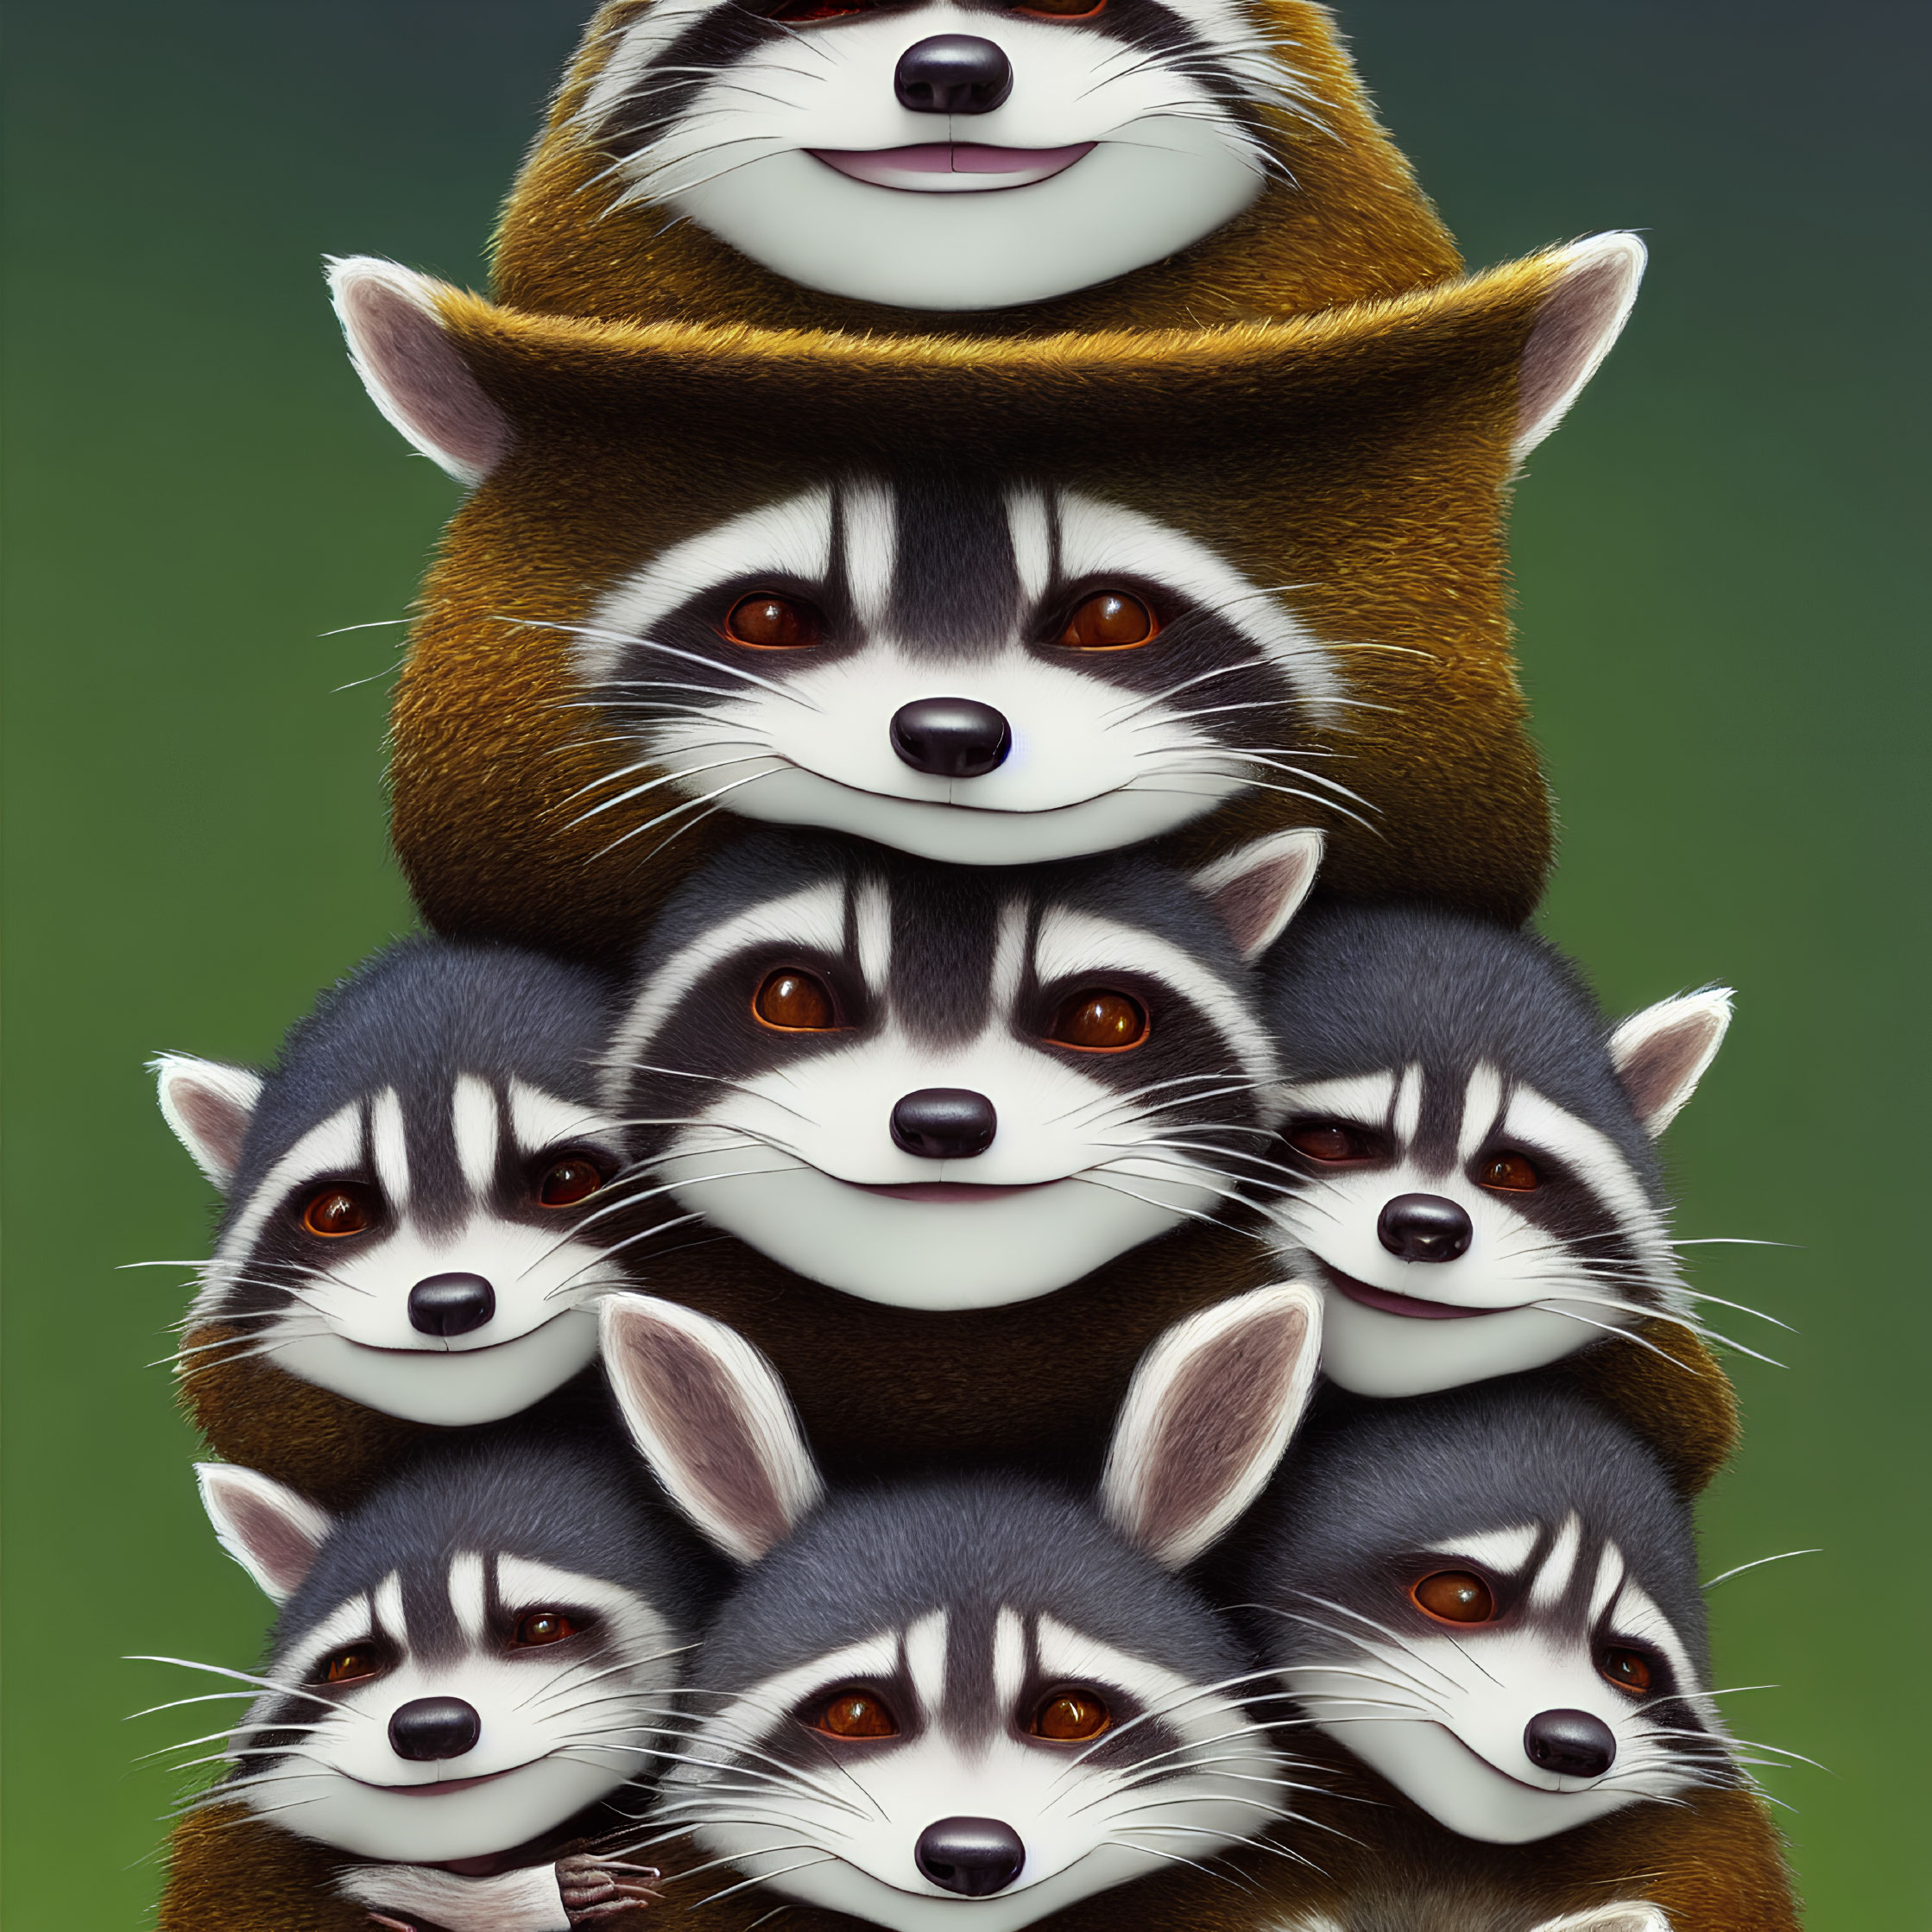 Seven smiling animated raccoons in pyramid formation on green background